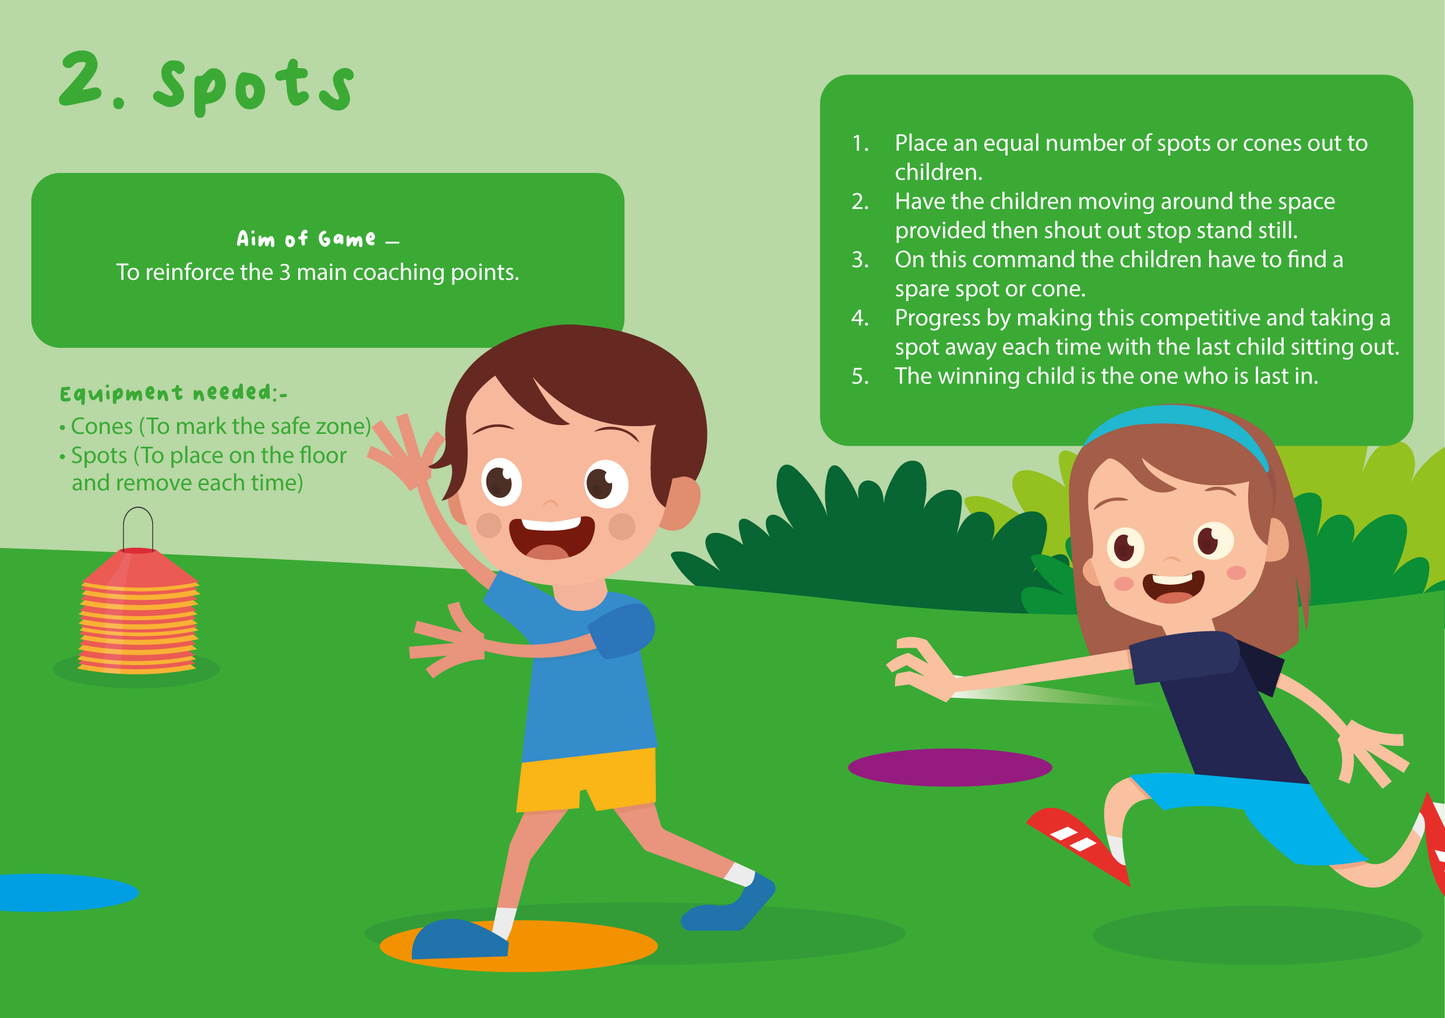 A simple but effective spots game that teaches children to keep their heads up when jogging around